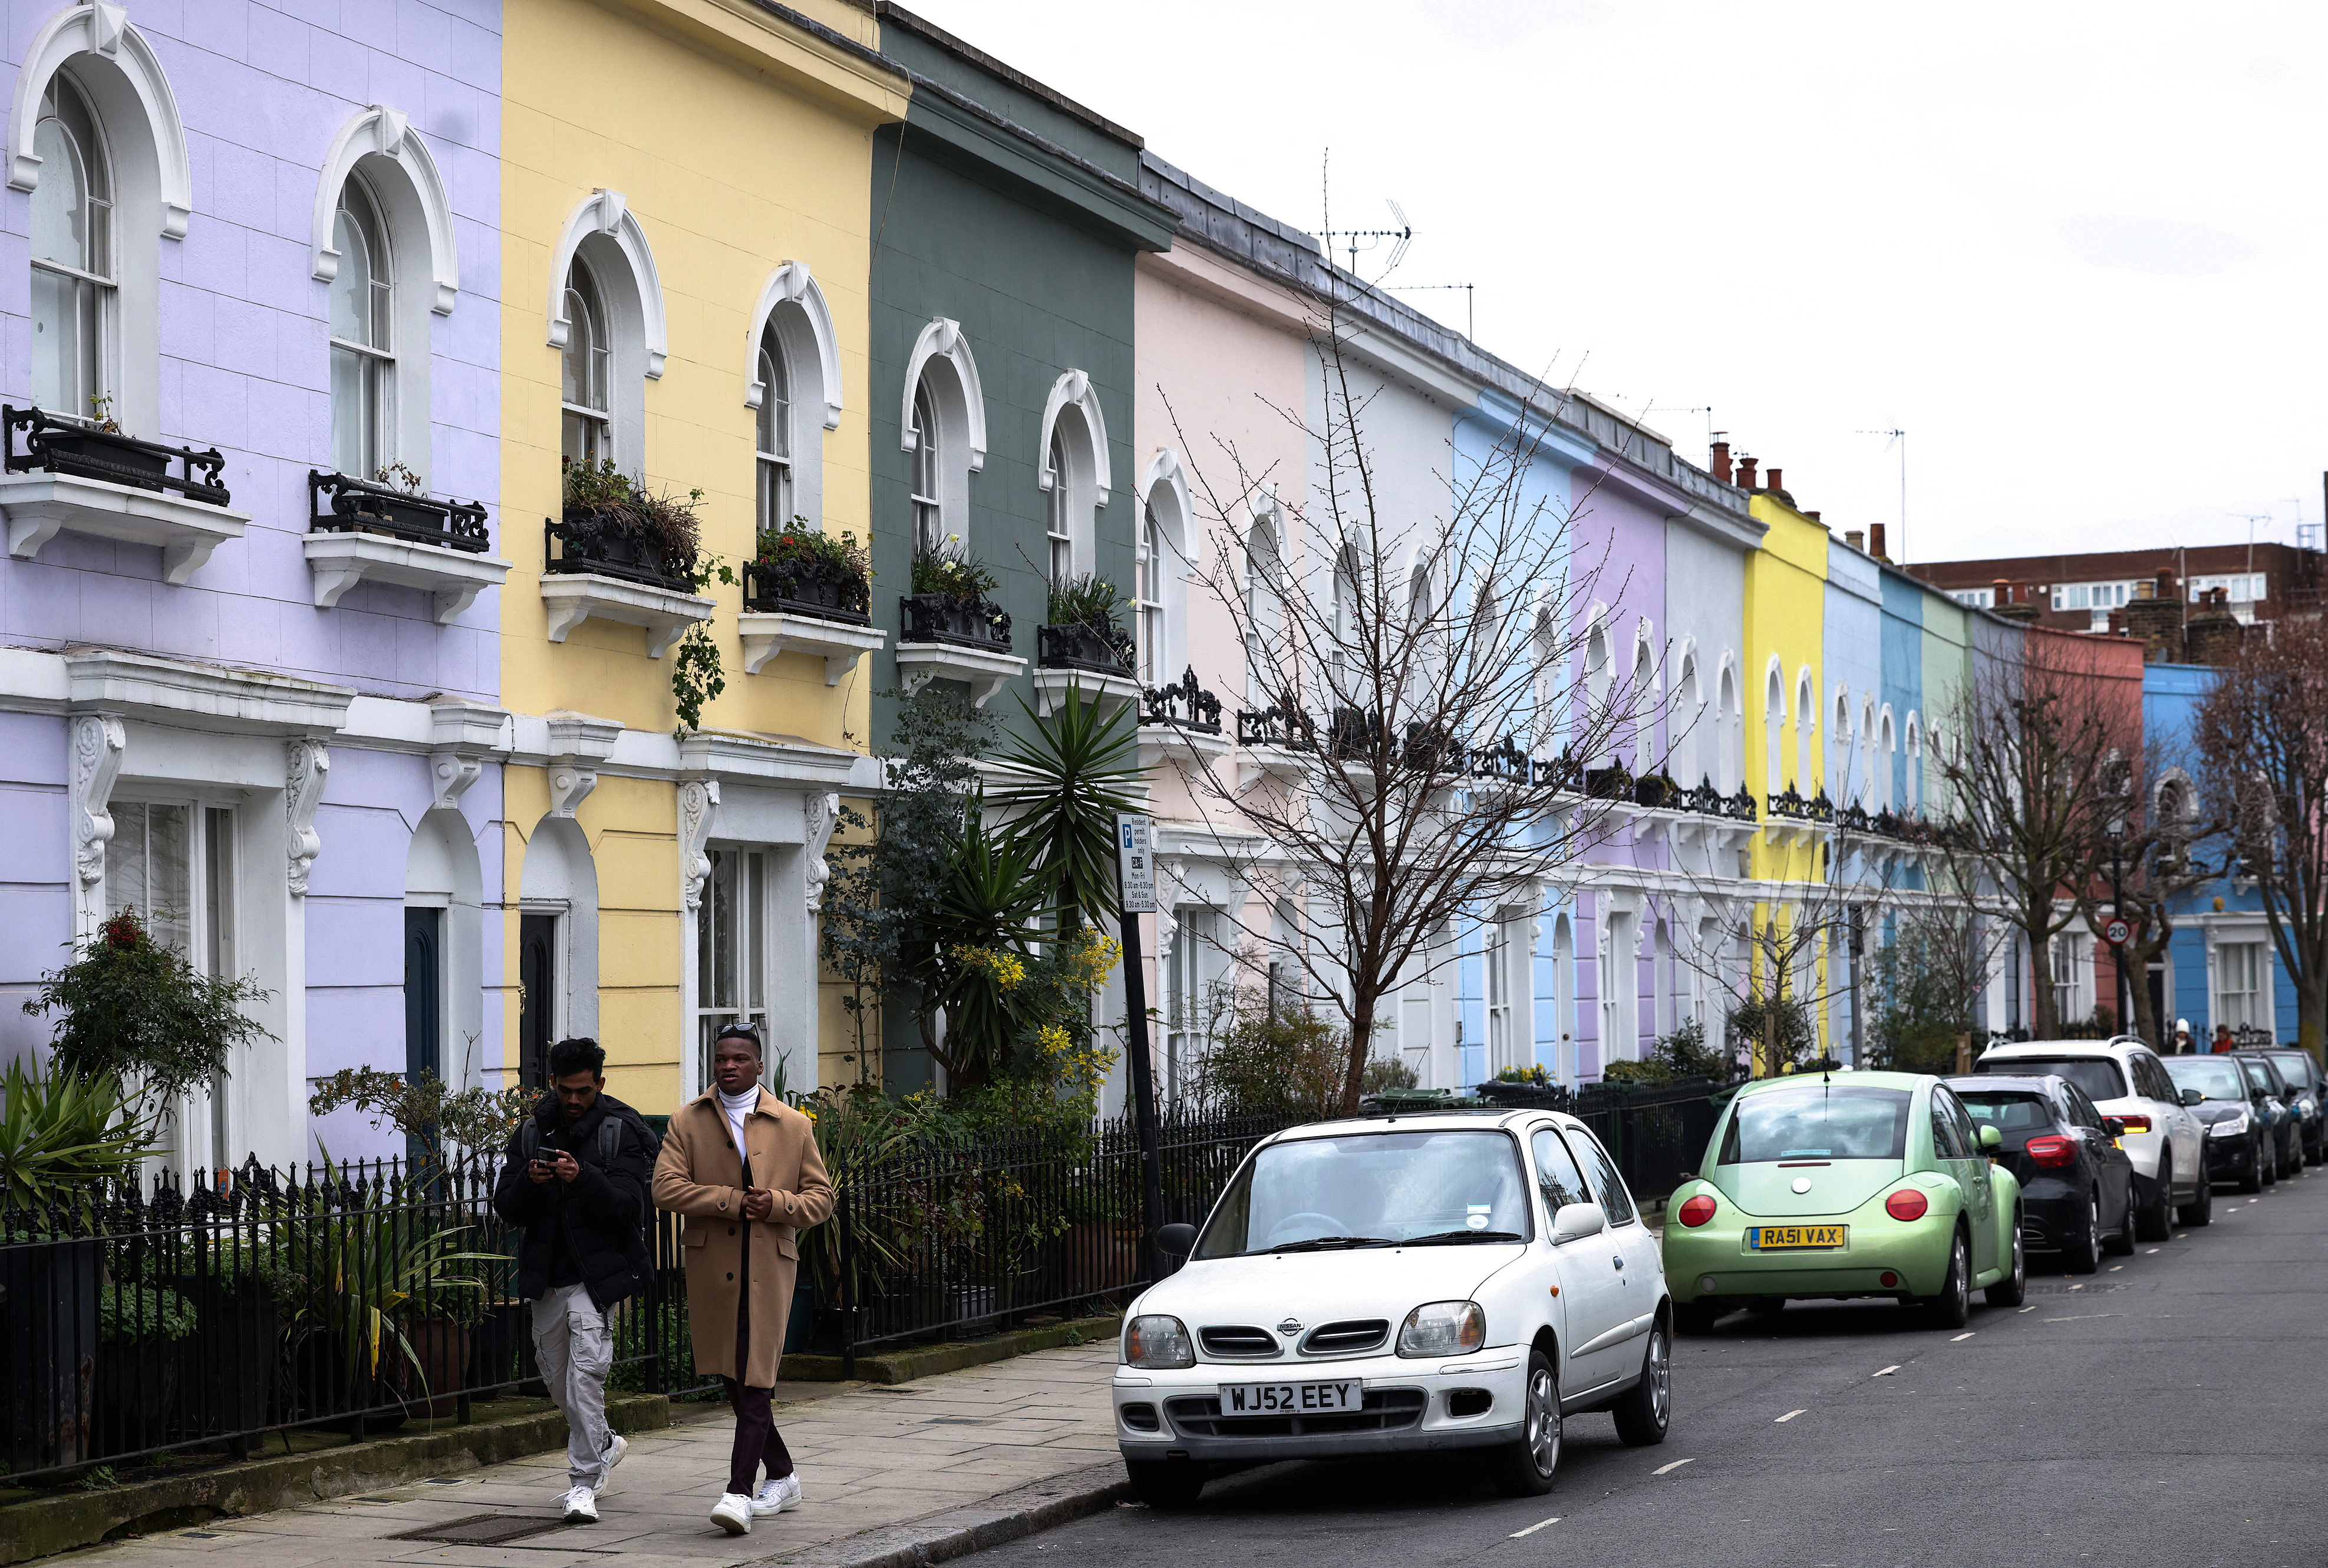 People walk past a row of colourful houses in London